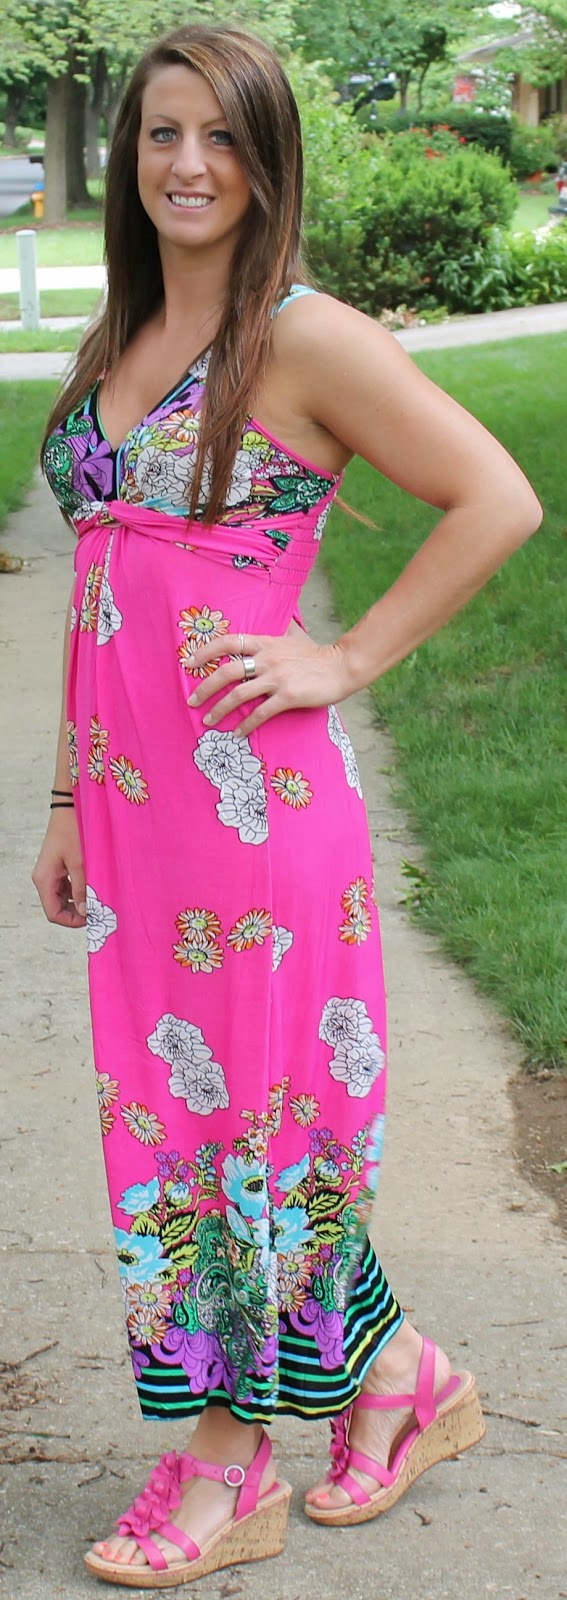 summer dress, outfit, fashion, get dressed, pink dress, pink wedges